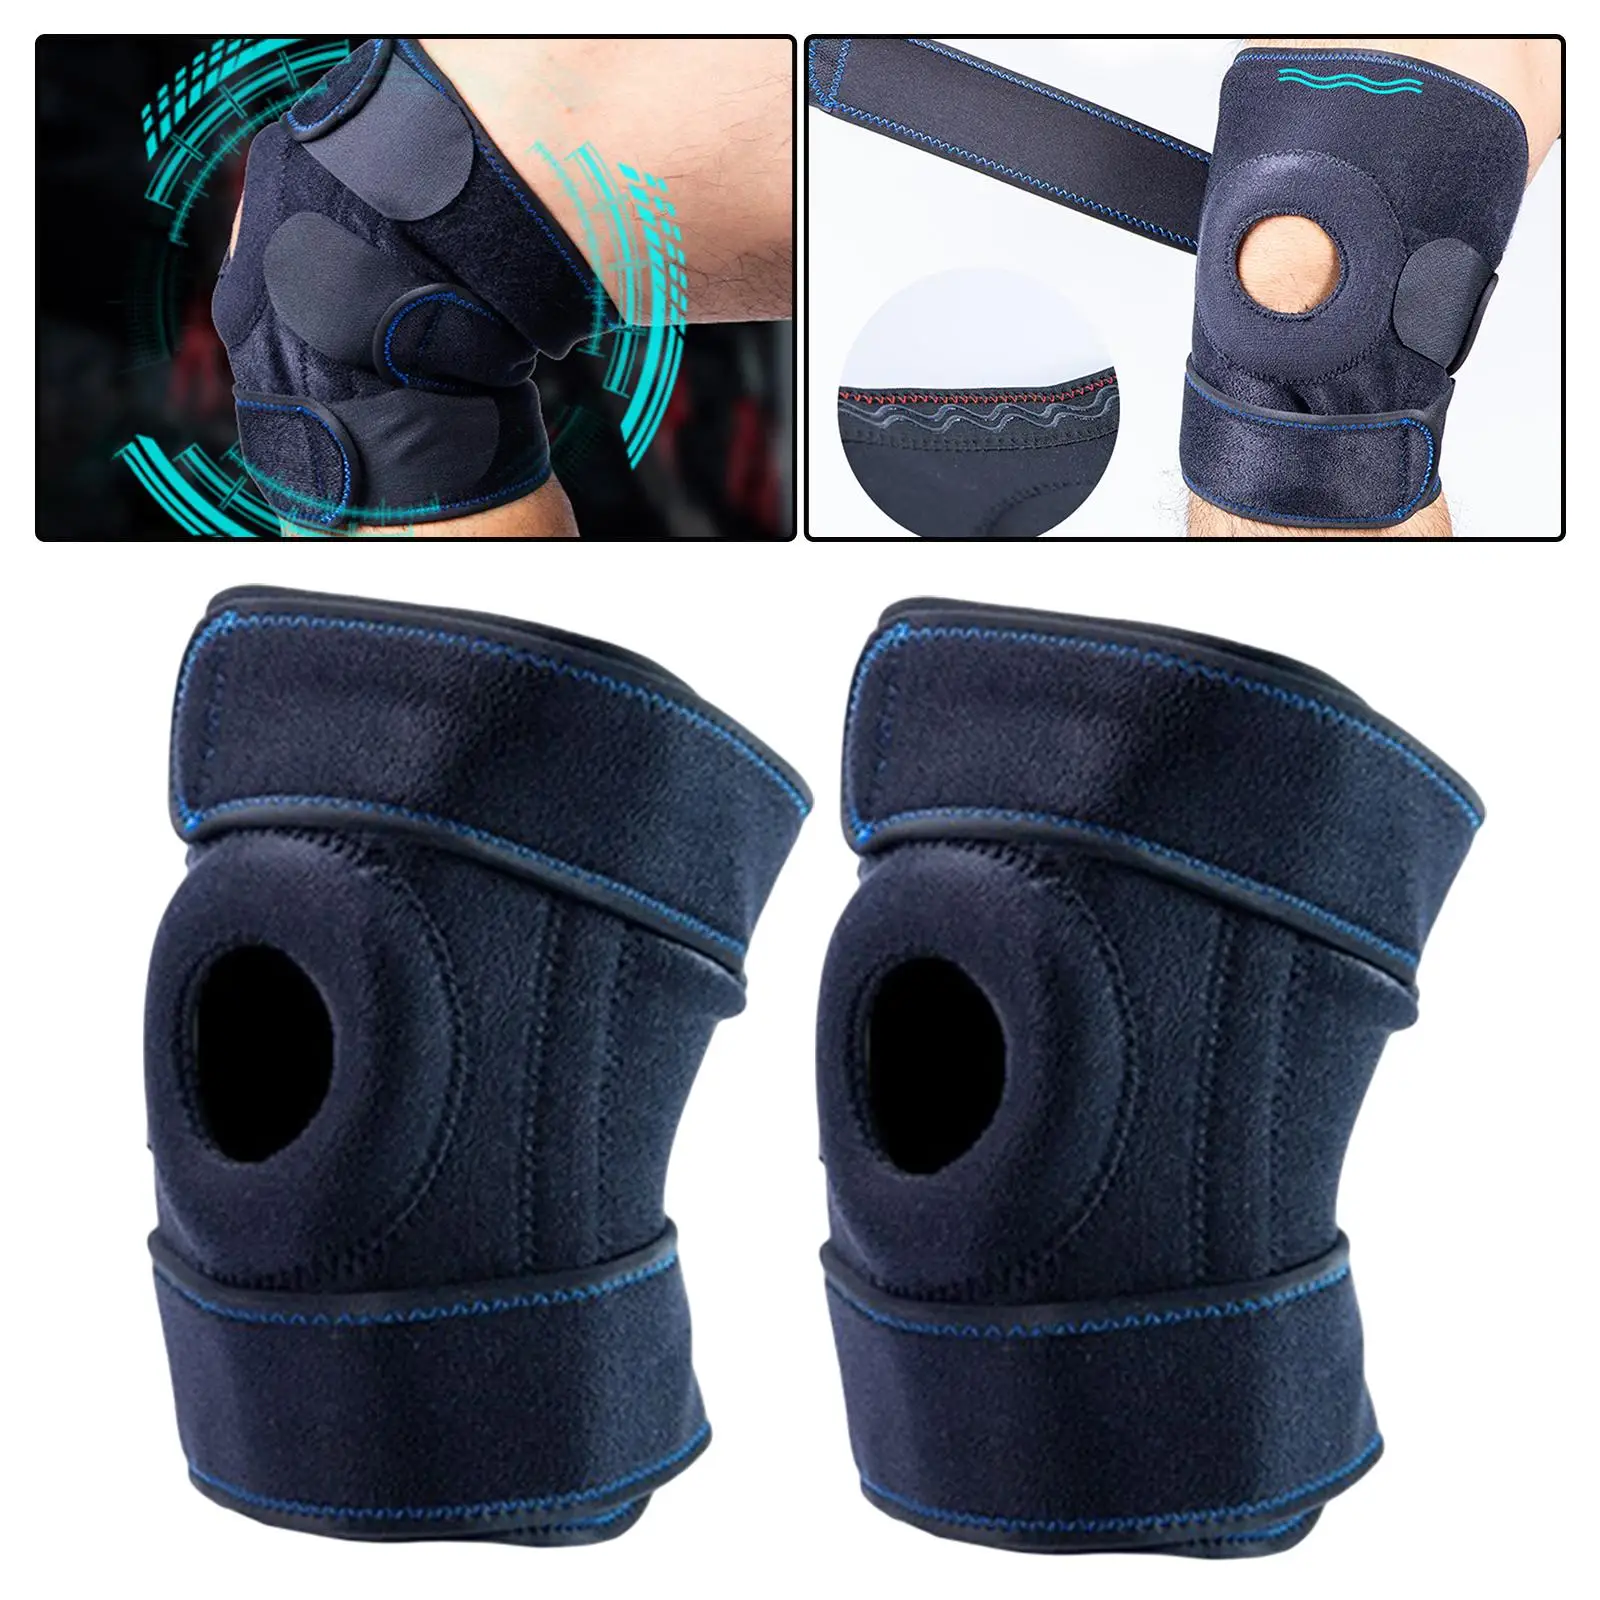 Compression Knee Braces for Knee Pain with Side Stabilizers Knee Support for